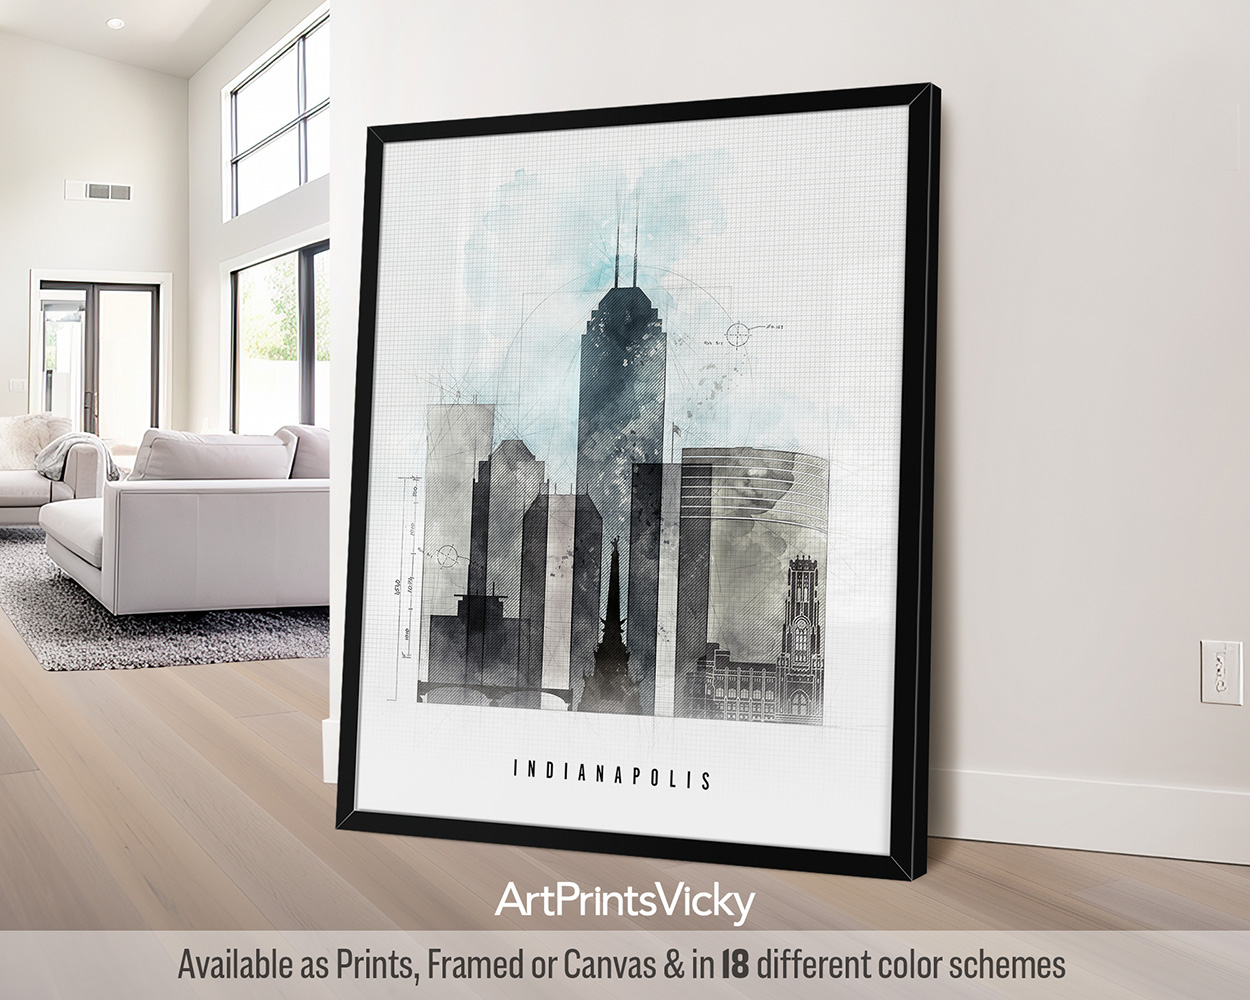 Indianapolis skyline featuring iconic landmarks in a minimalist Urban 1 style with bold lines, by ArtPrintsVicky.